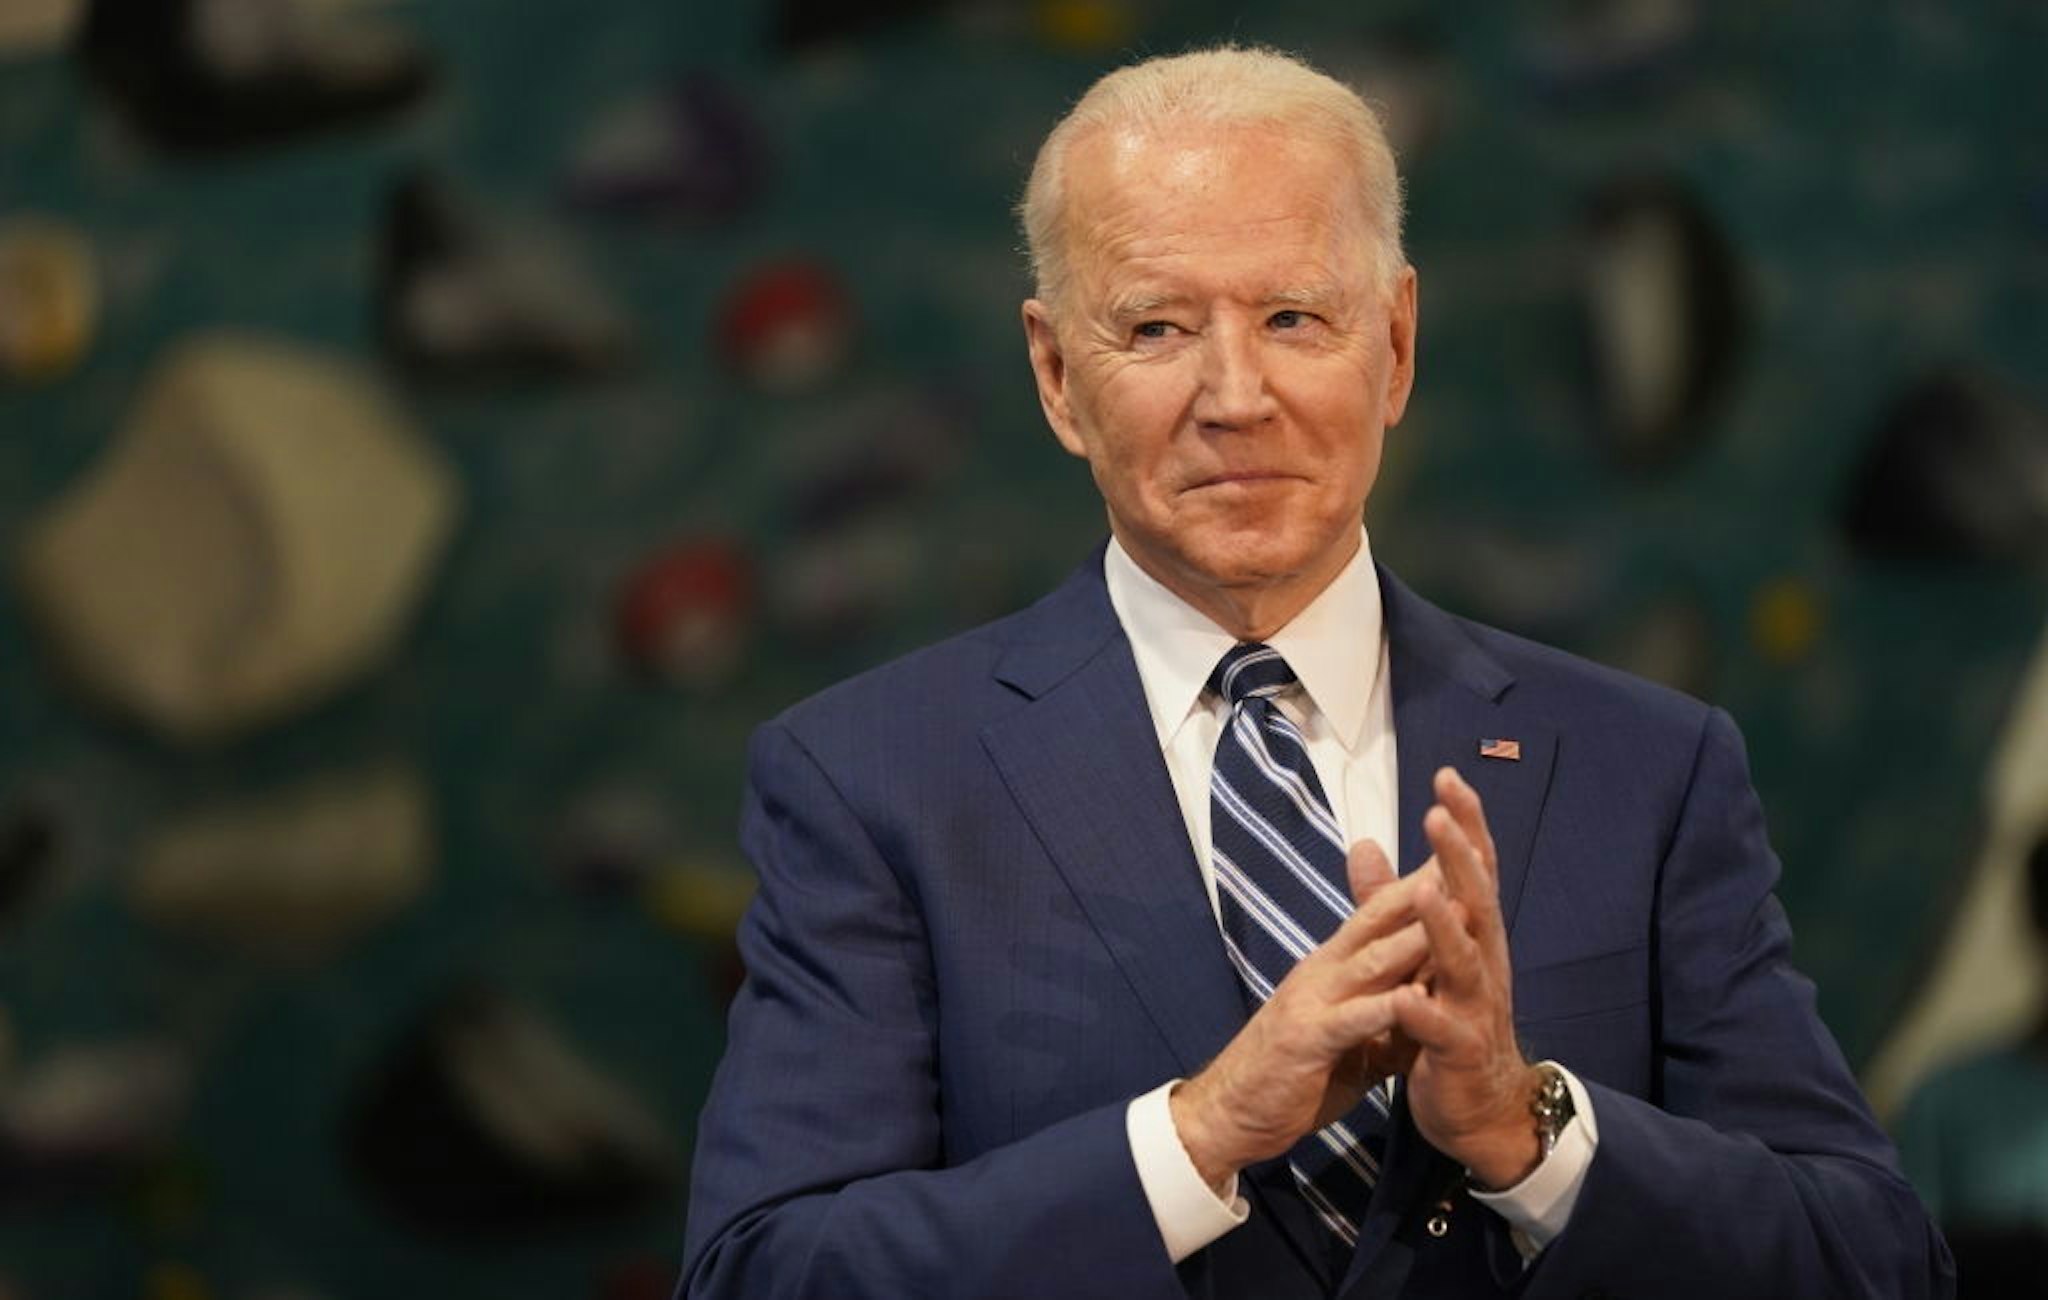 U.S. President Joe Biden applauds while Ralph Northam, governor of Virginia, not pictured, speaks at Sportrock Climbing Center during an event in Alexandria, Virginia, U.S., on Friday, May 28, 2021. Biden this week said he ordered the U.S. intelligence community to "redouble" its effort to determine where the coronavirus came from, after conflicting conclusions about whether its origins are natural or a lab accident. Photographer: Chris Kleponis/CNP/Bloomberg